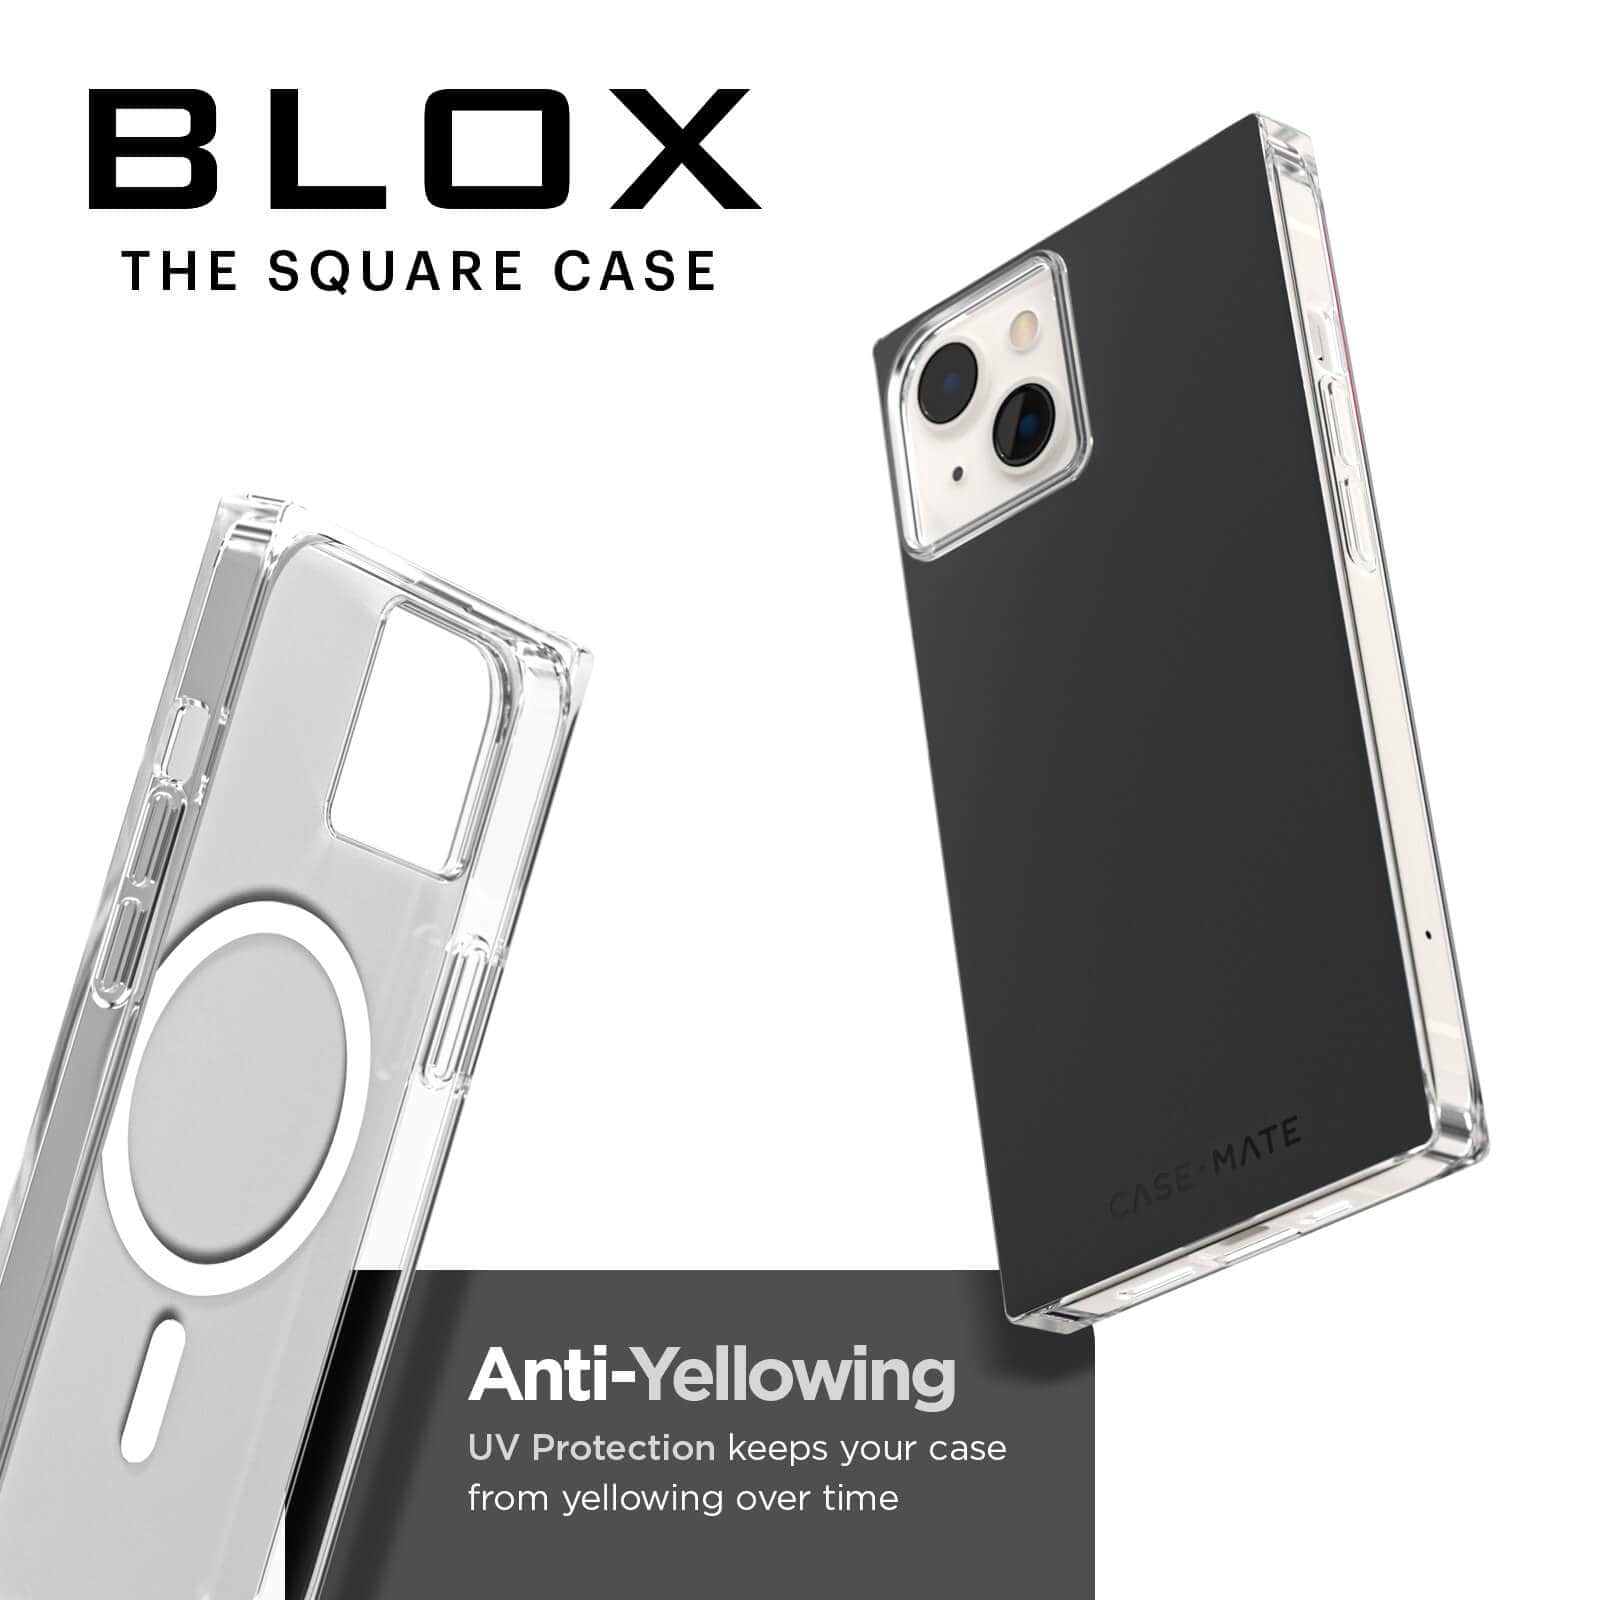 BLOX the Square Case. Anti-yellowing UV protection keeps your case from yellowing over time. color::Black